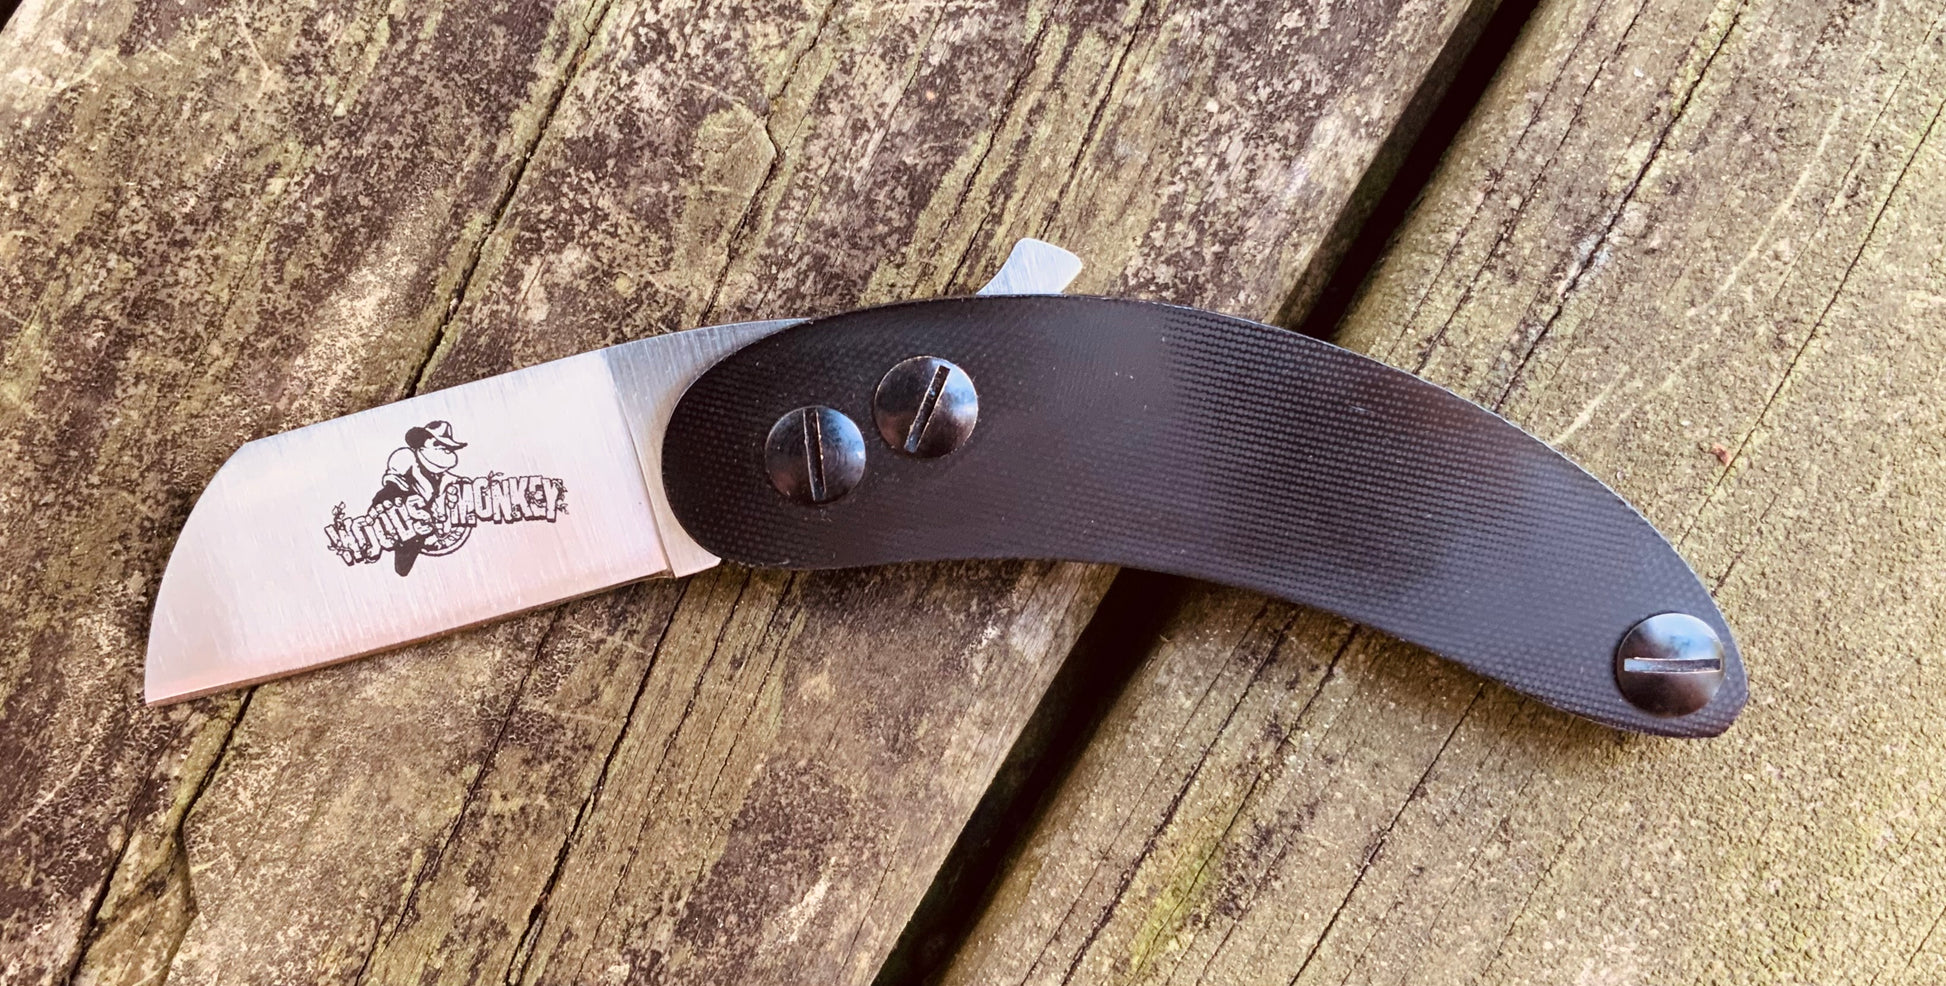 Woods Monkey Neck Knife with AEB-L Wharncliffe blade and black G10 scales